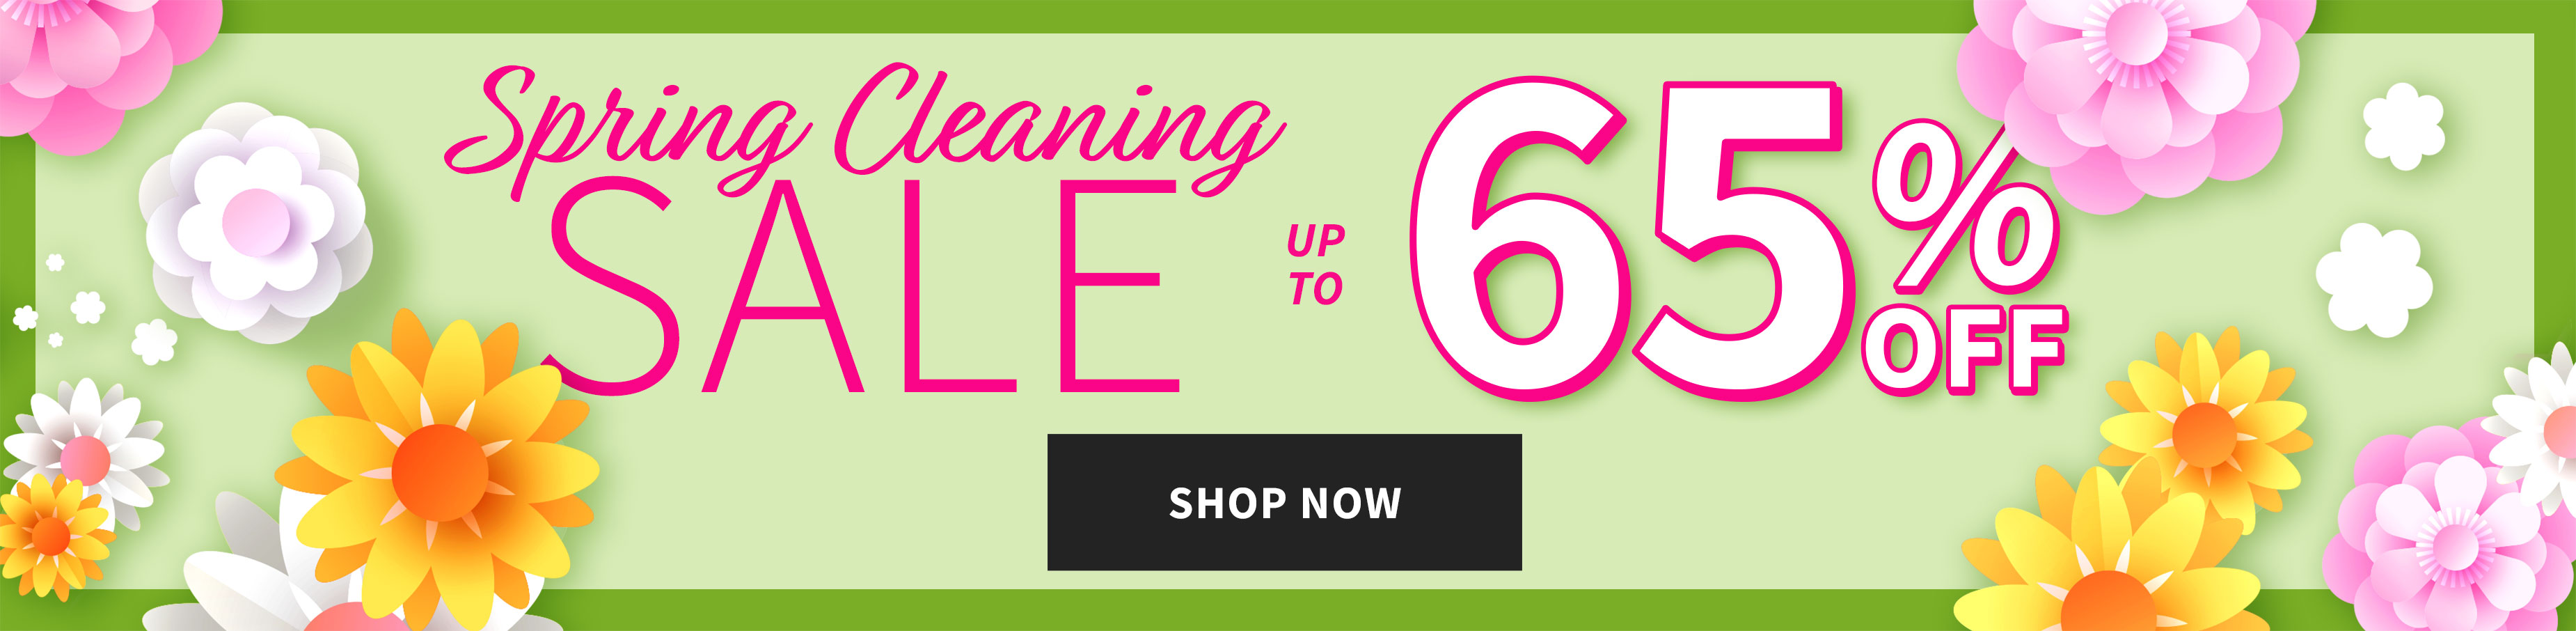 Spring Cleaning Sale up to 65% off.